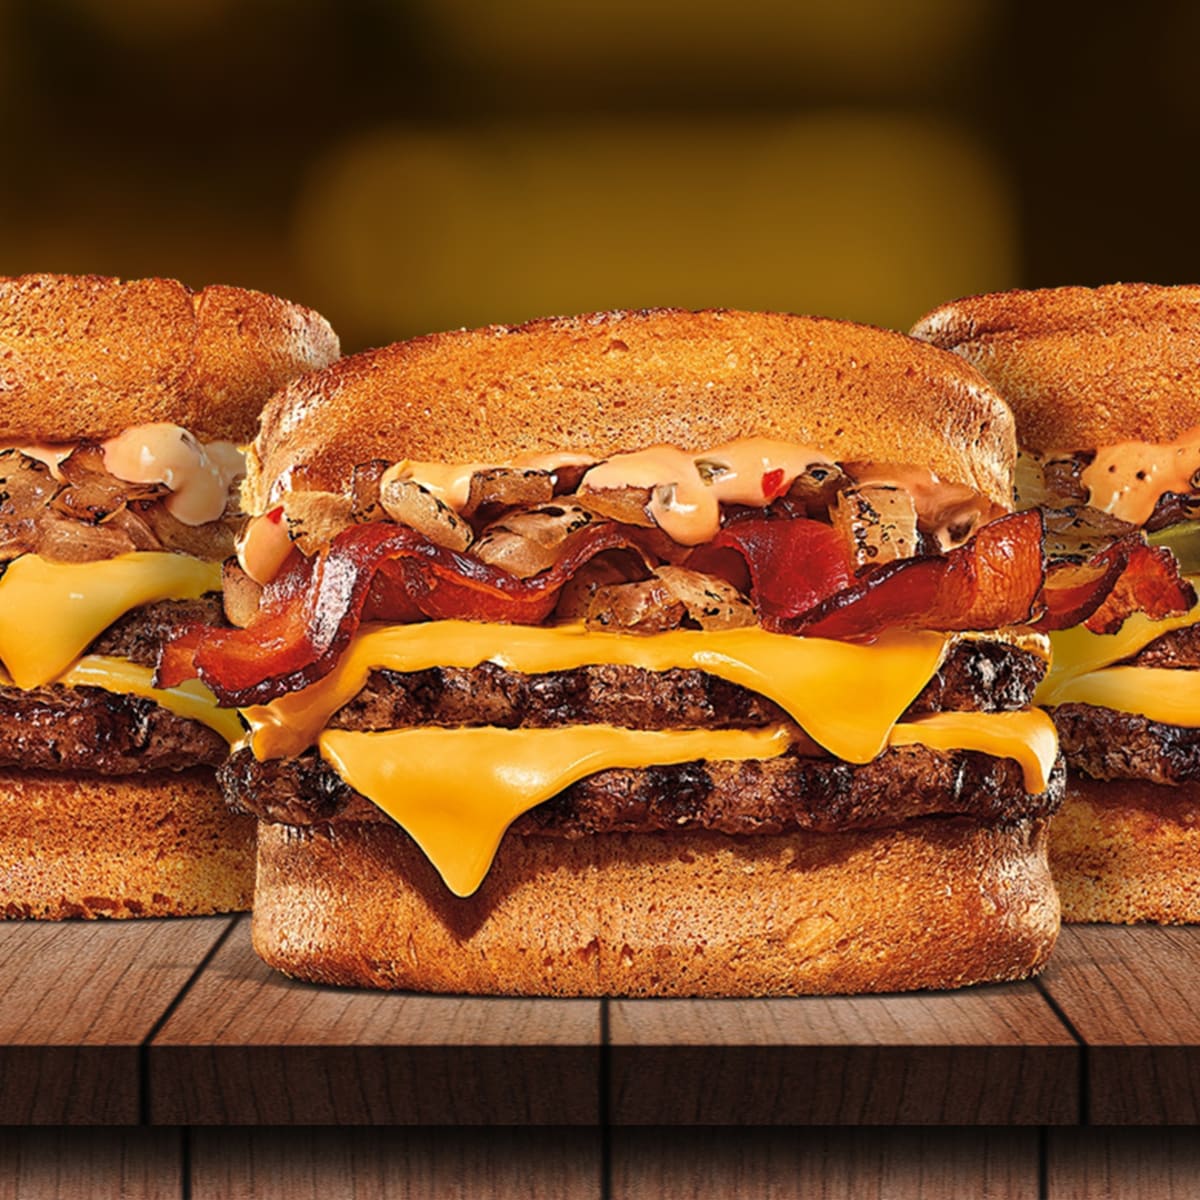 A New Whopper: Burger King Tries to Find Its Next Sandwich Hit